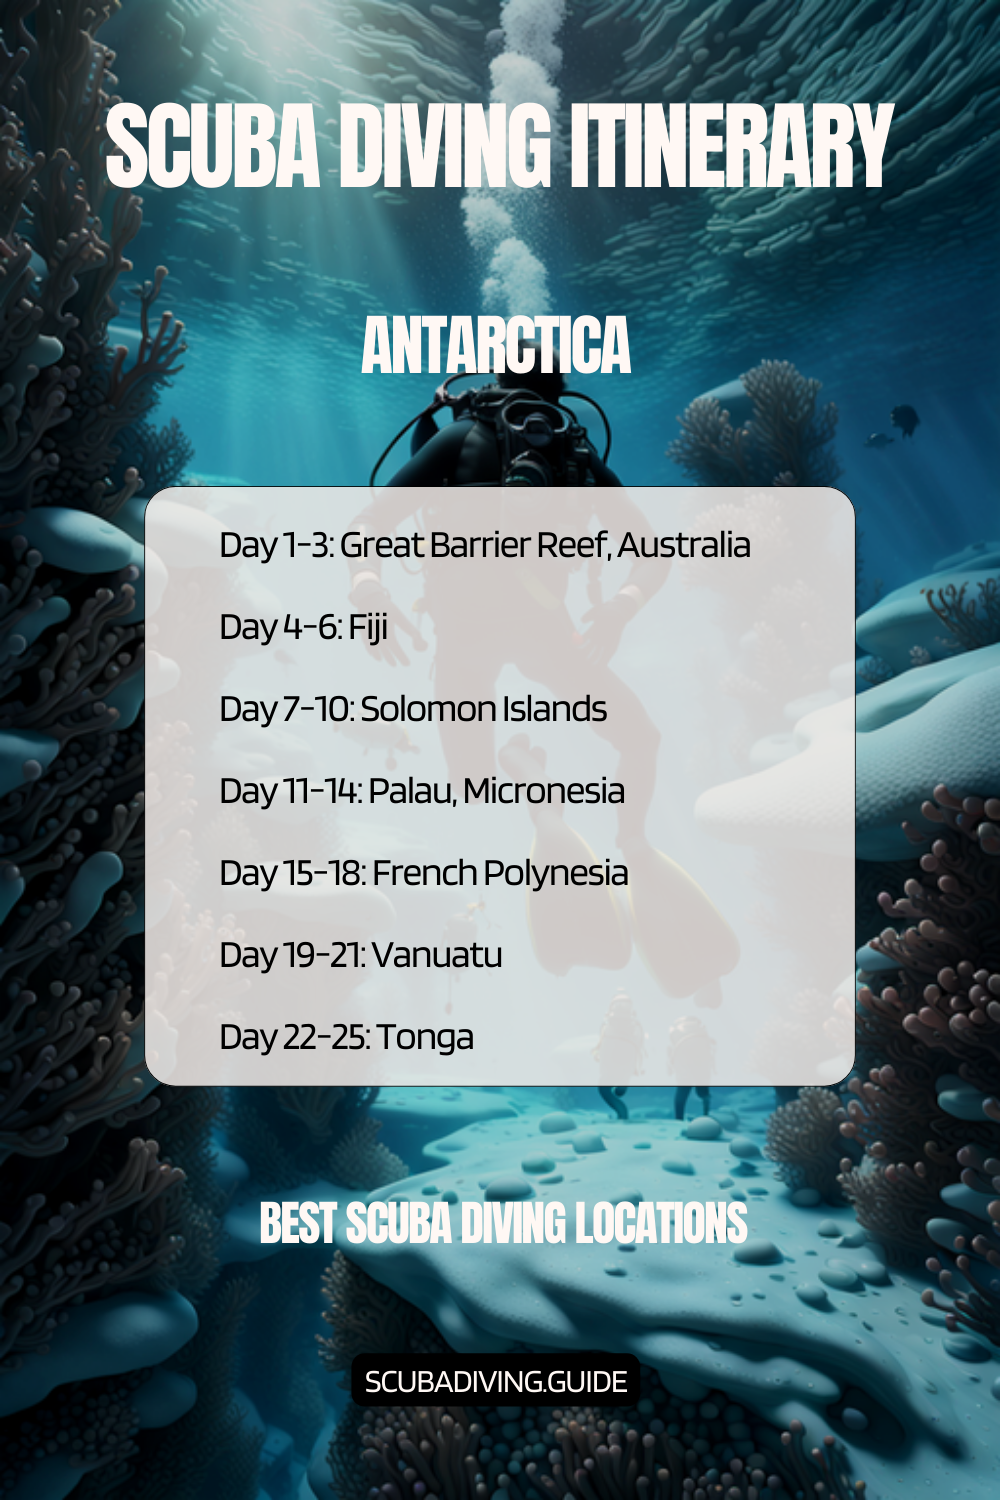 Antarctica Recommended Scuba Diving Itinerary